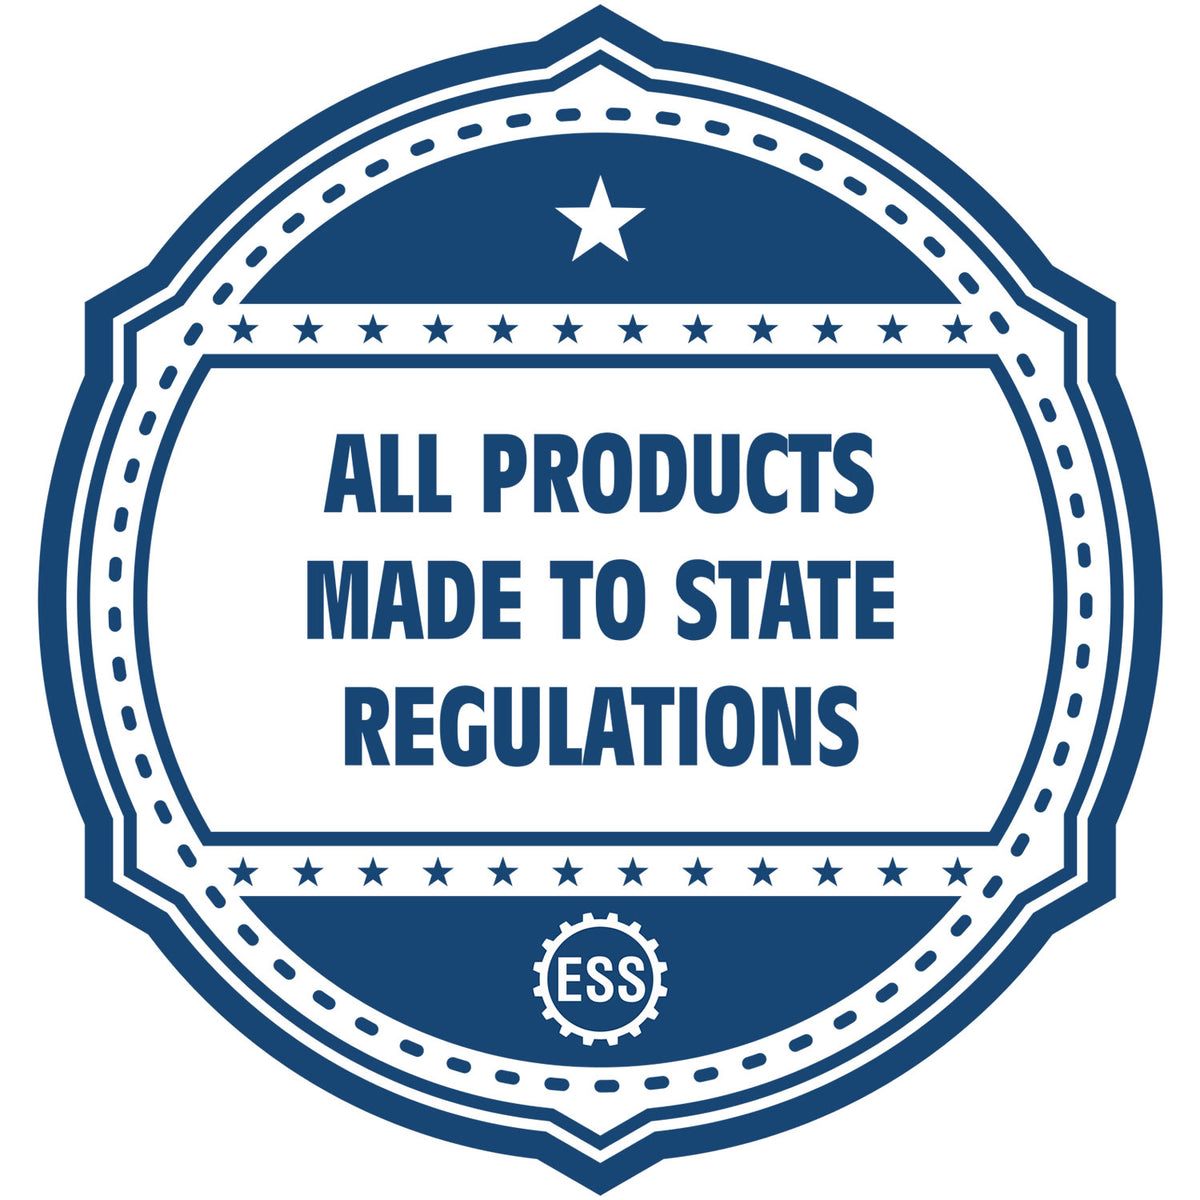 An icon or badge element for the Heavy Duty Cast Iron Alabama Architect Embosser showing that this product is made in compliance with state regulations.